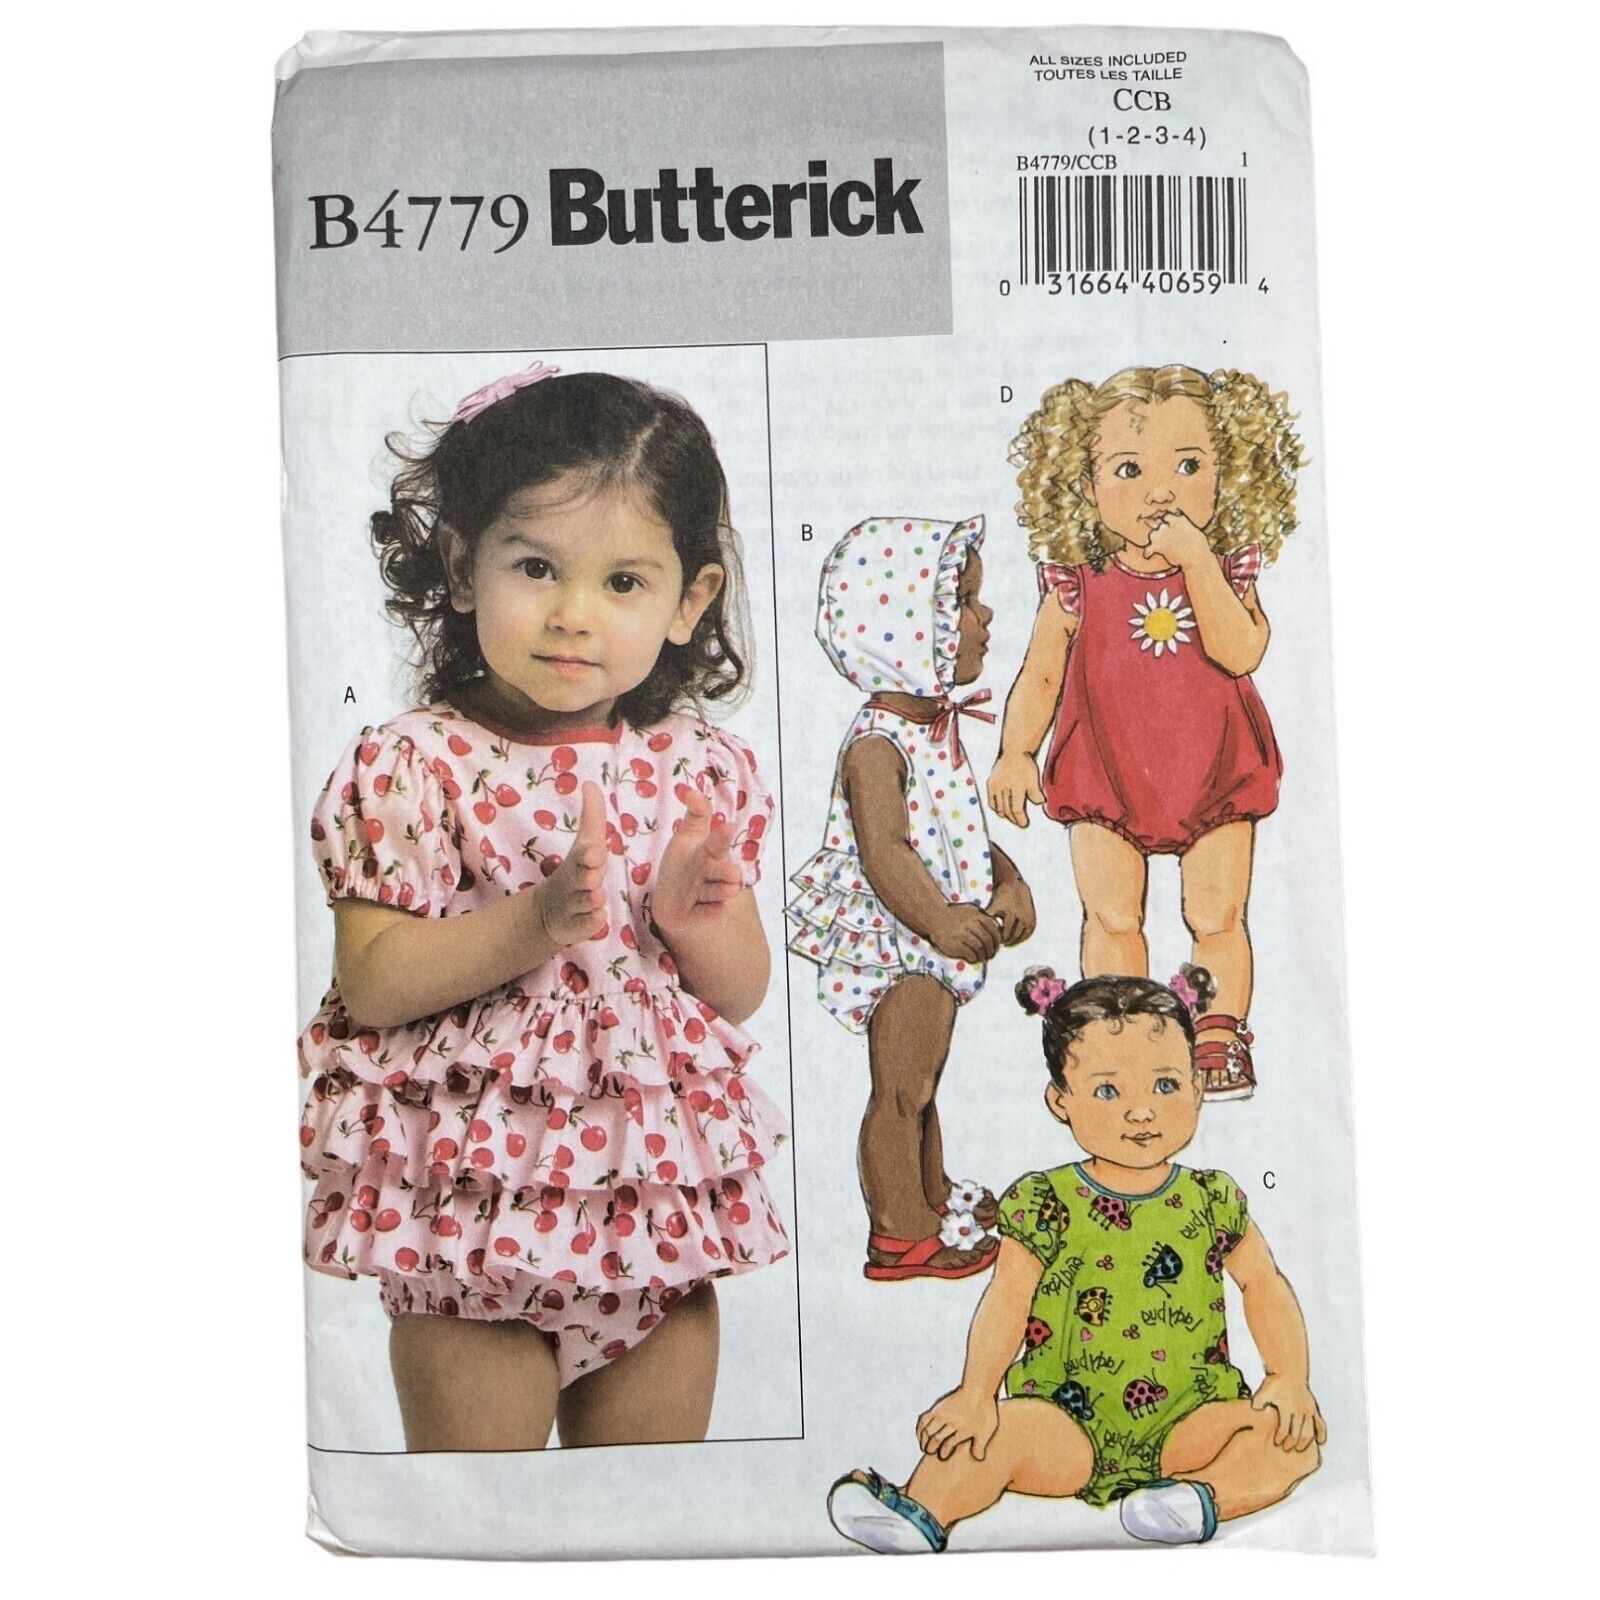 Primary image for Butterick Sewing Pattern 4779 Playsuit Bonnet Toddler Size 1-4